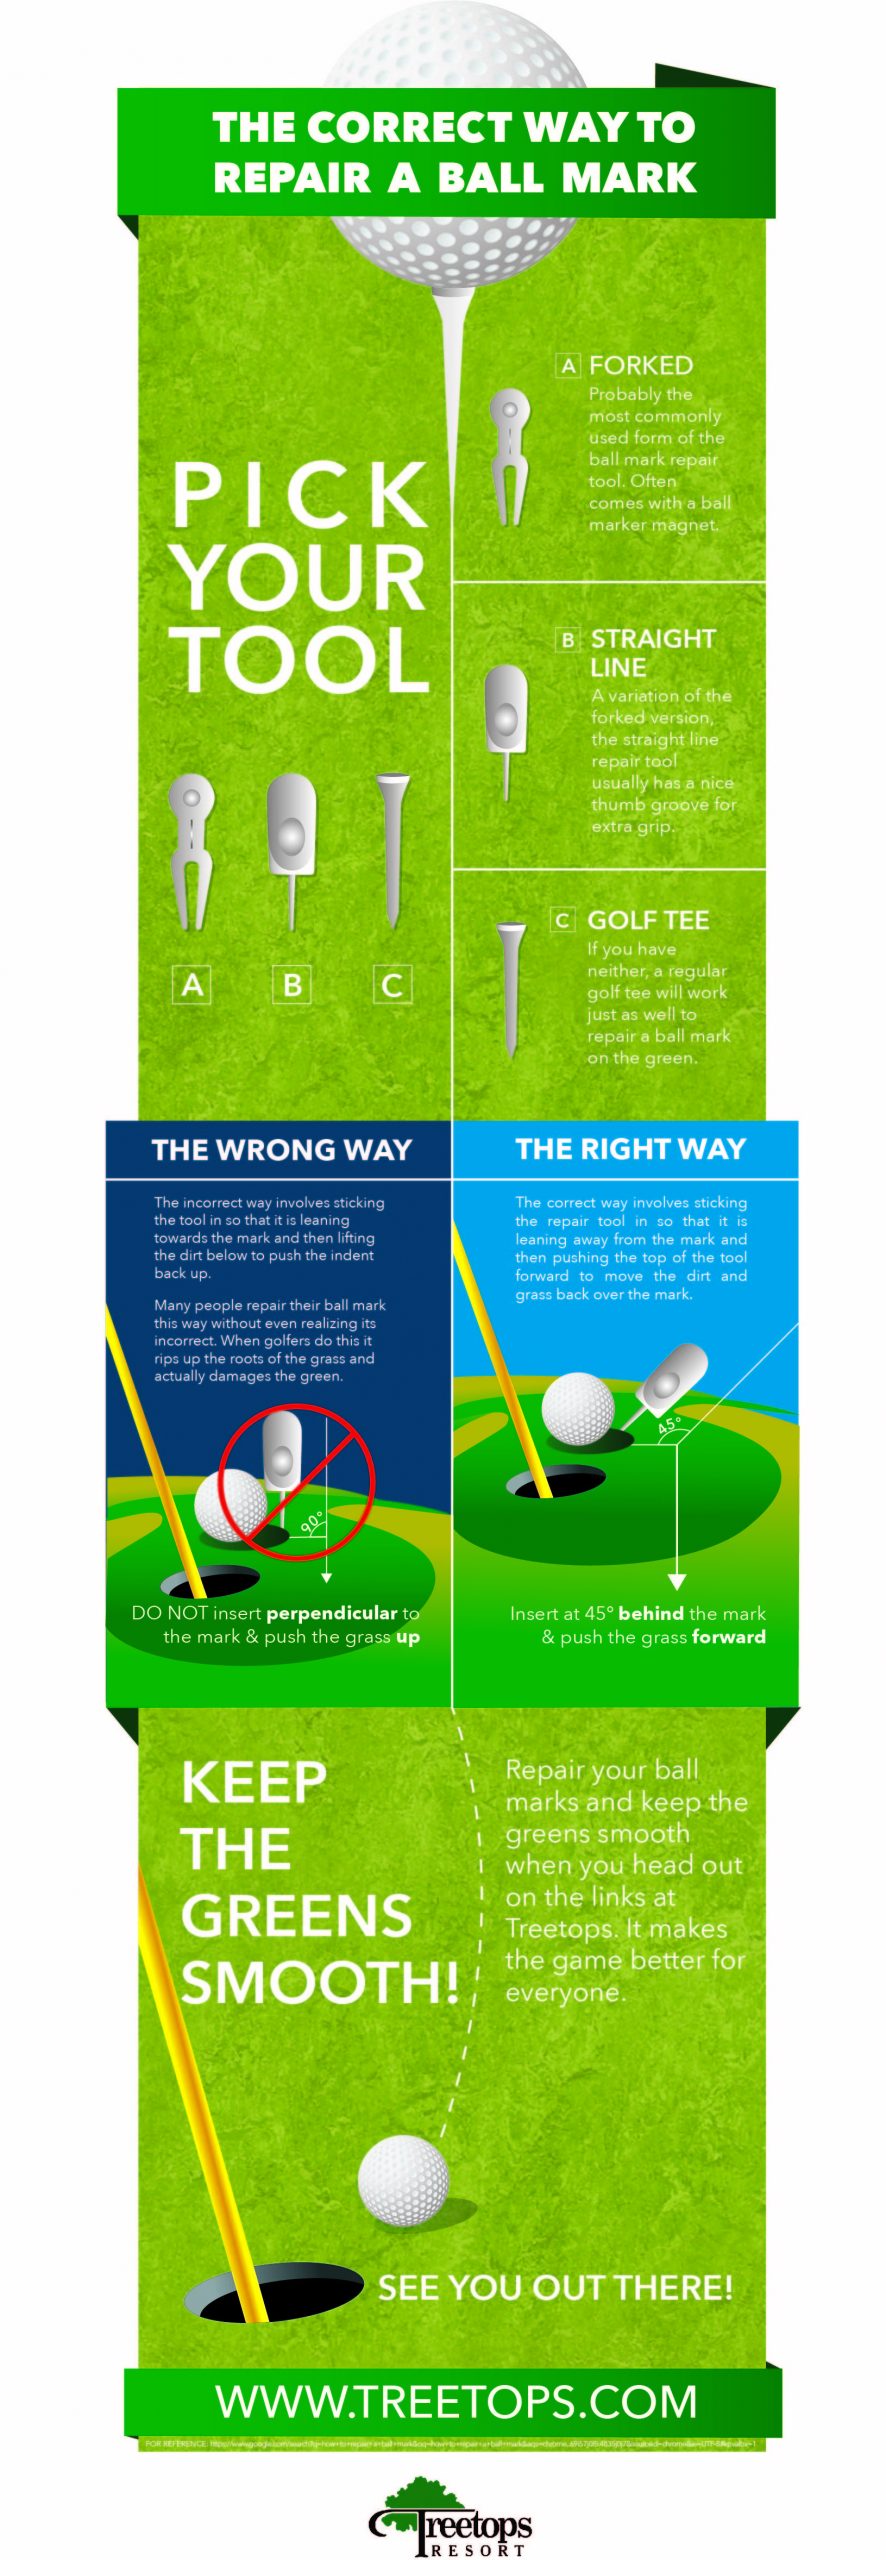 how to properly repair a ball mark